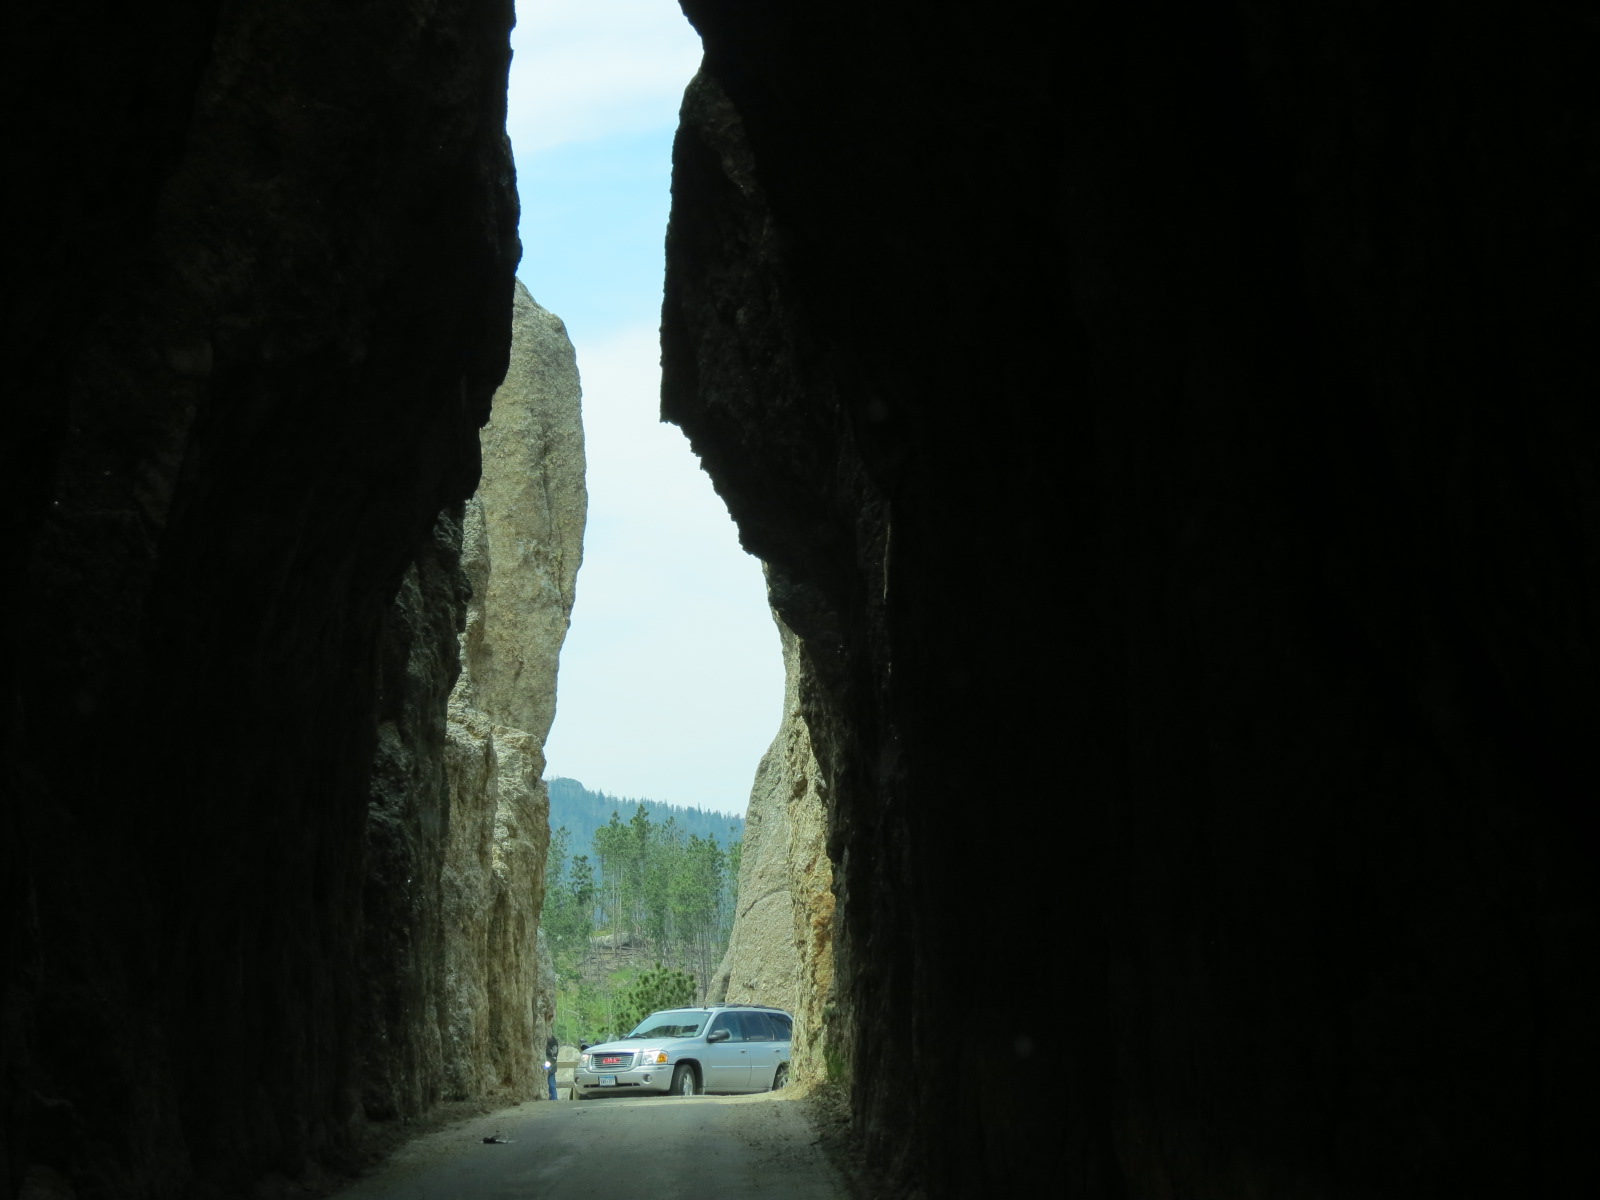 Driving thru tunnel in the Black Hills, SD